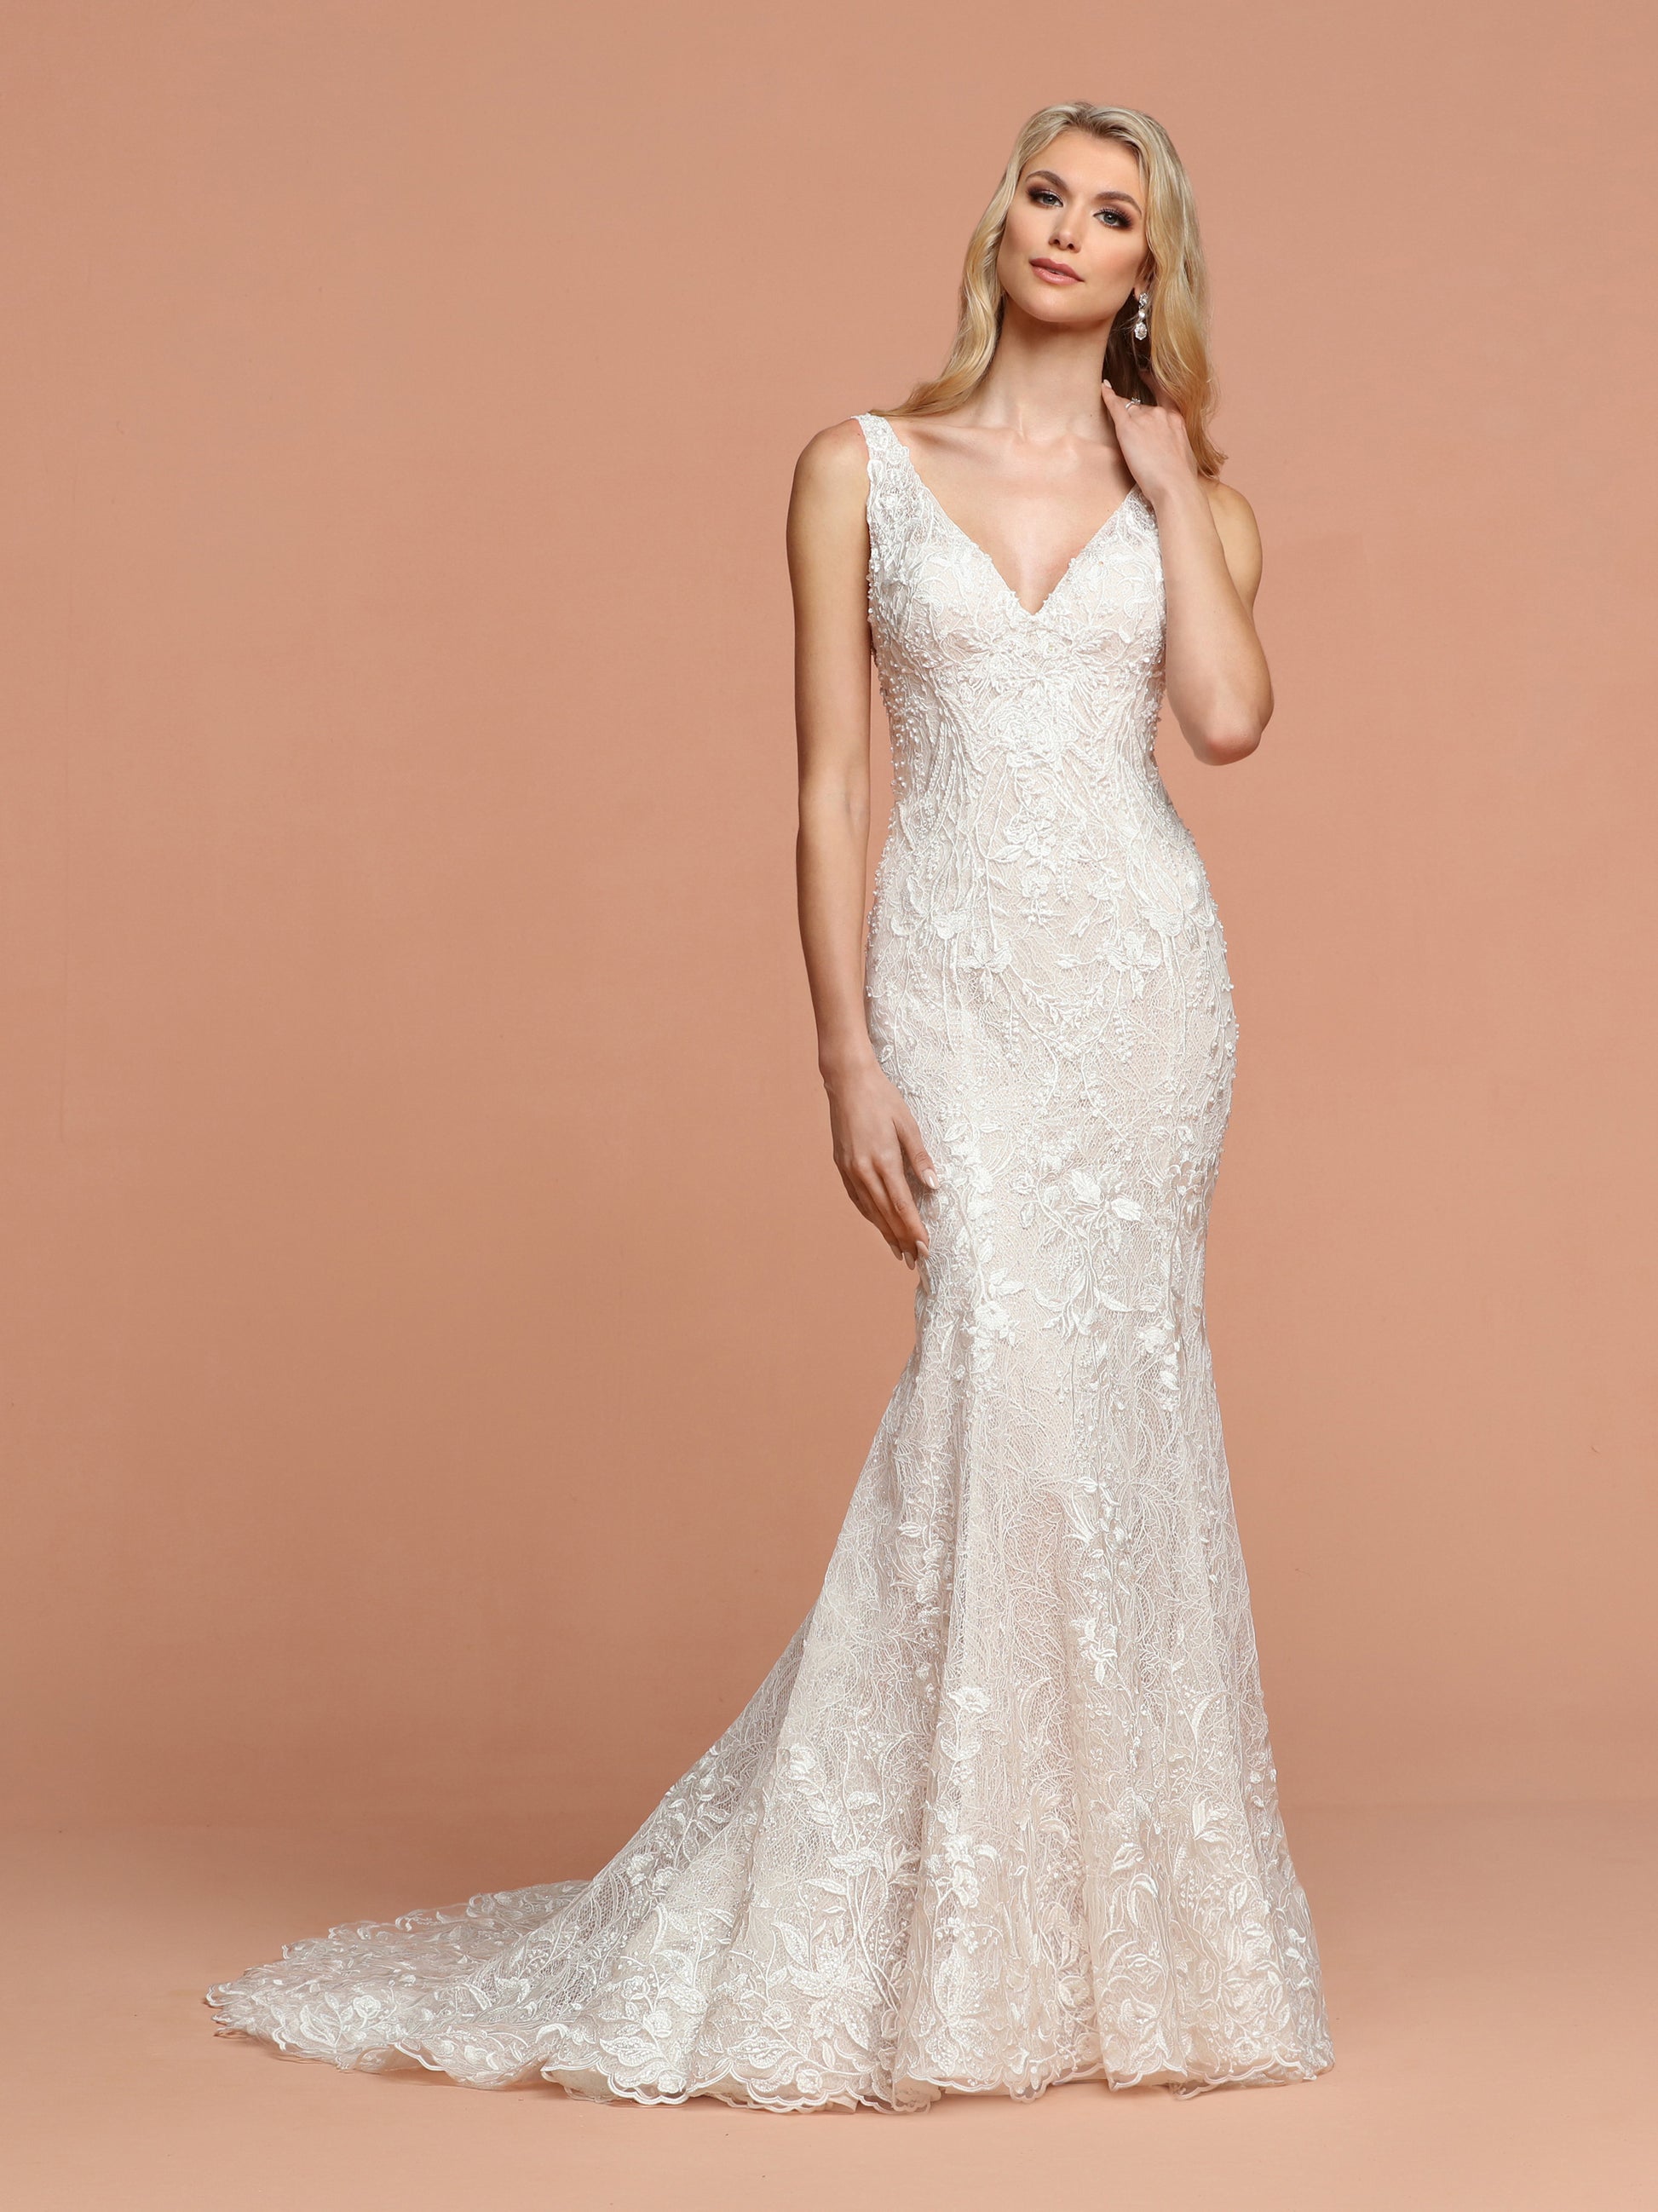 Davinci Bridal 50582 is a long Fitted All over Lace Embellished Wedding Dress. Featuring a V neckline with an open V back. Stunning gown is Hand beaded with a full lace train.  Available for 1-2 Week Delivery!!!  Available Sizes: 2,4,6,8,10,12,14,16,18,20  Available Colors: Ivory/Blush, Ivory/Ivory  Available Colors: Ivory/Blush, Ivory/Ivory